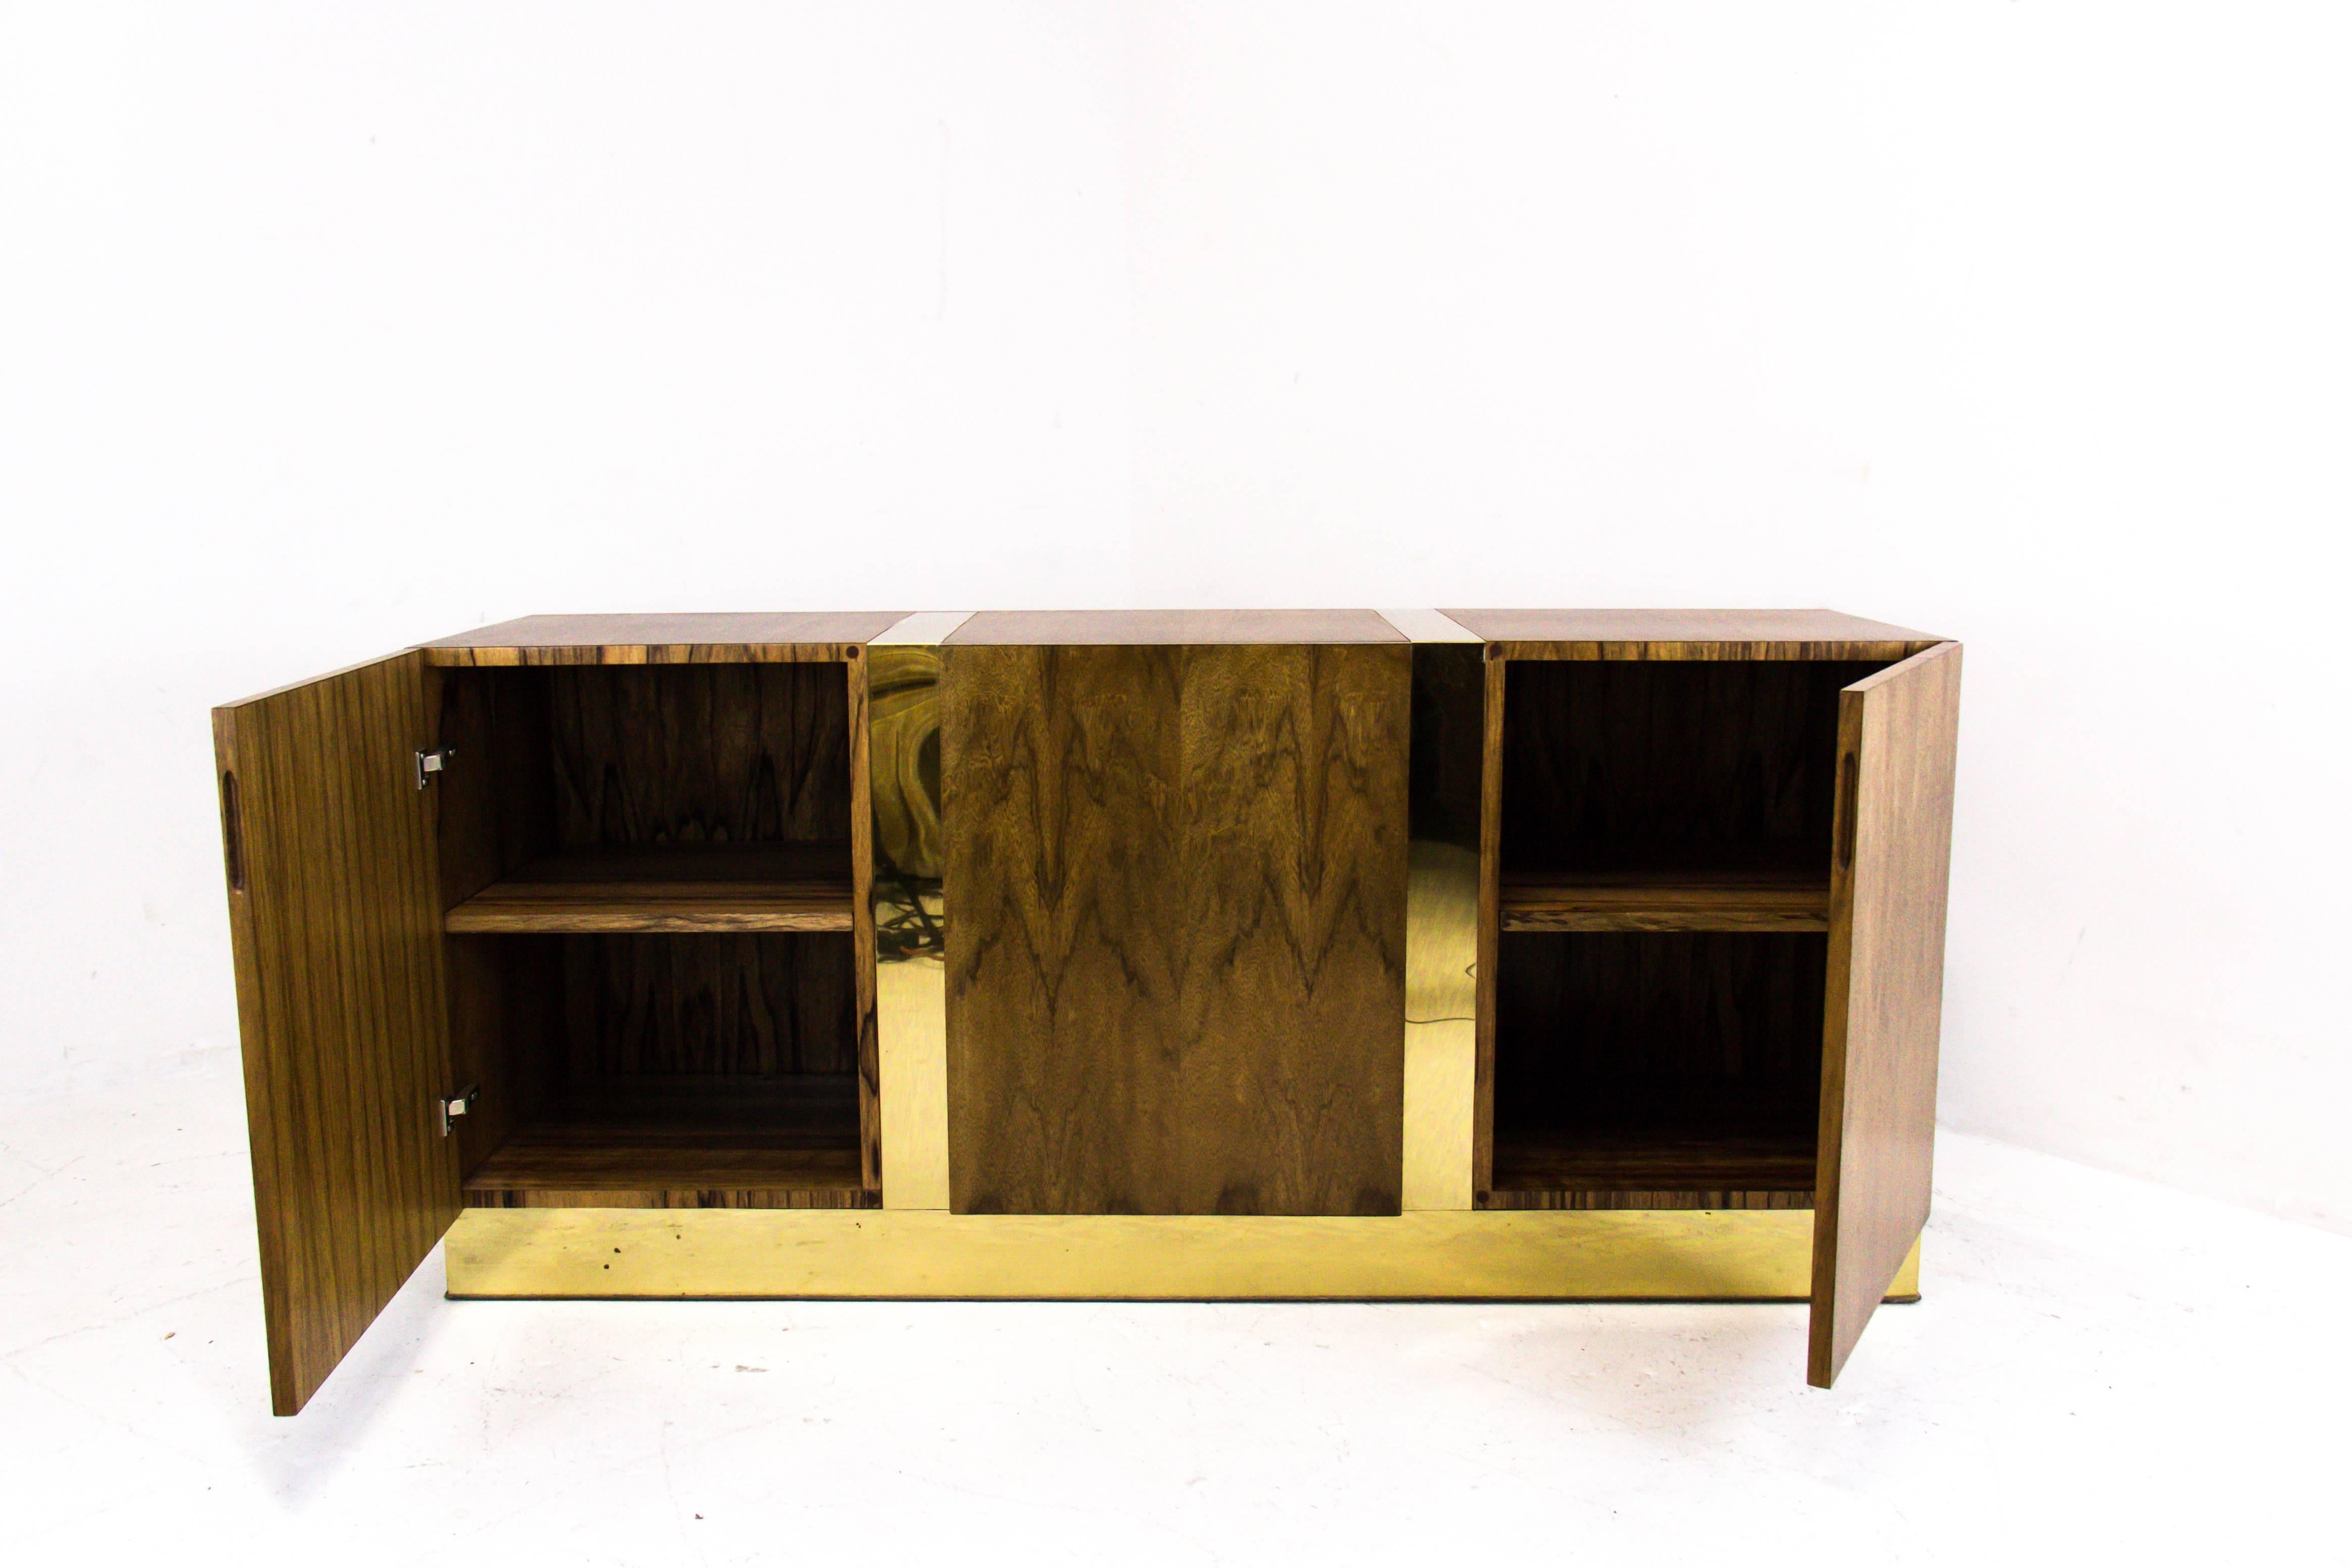 Plated Zebra Wood and Brass Credenza by Milo Baughman